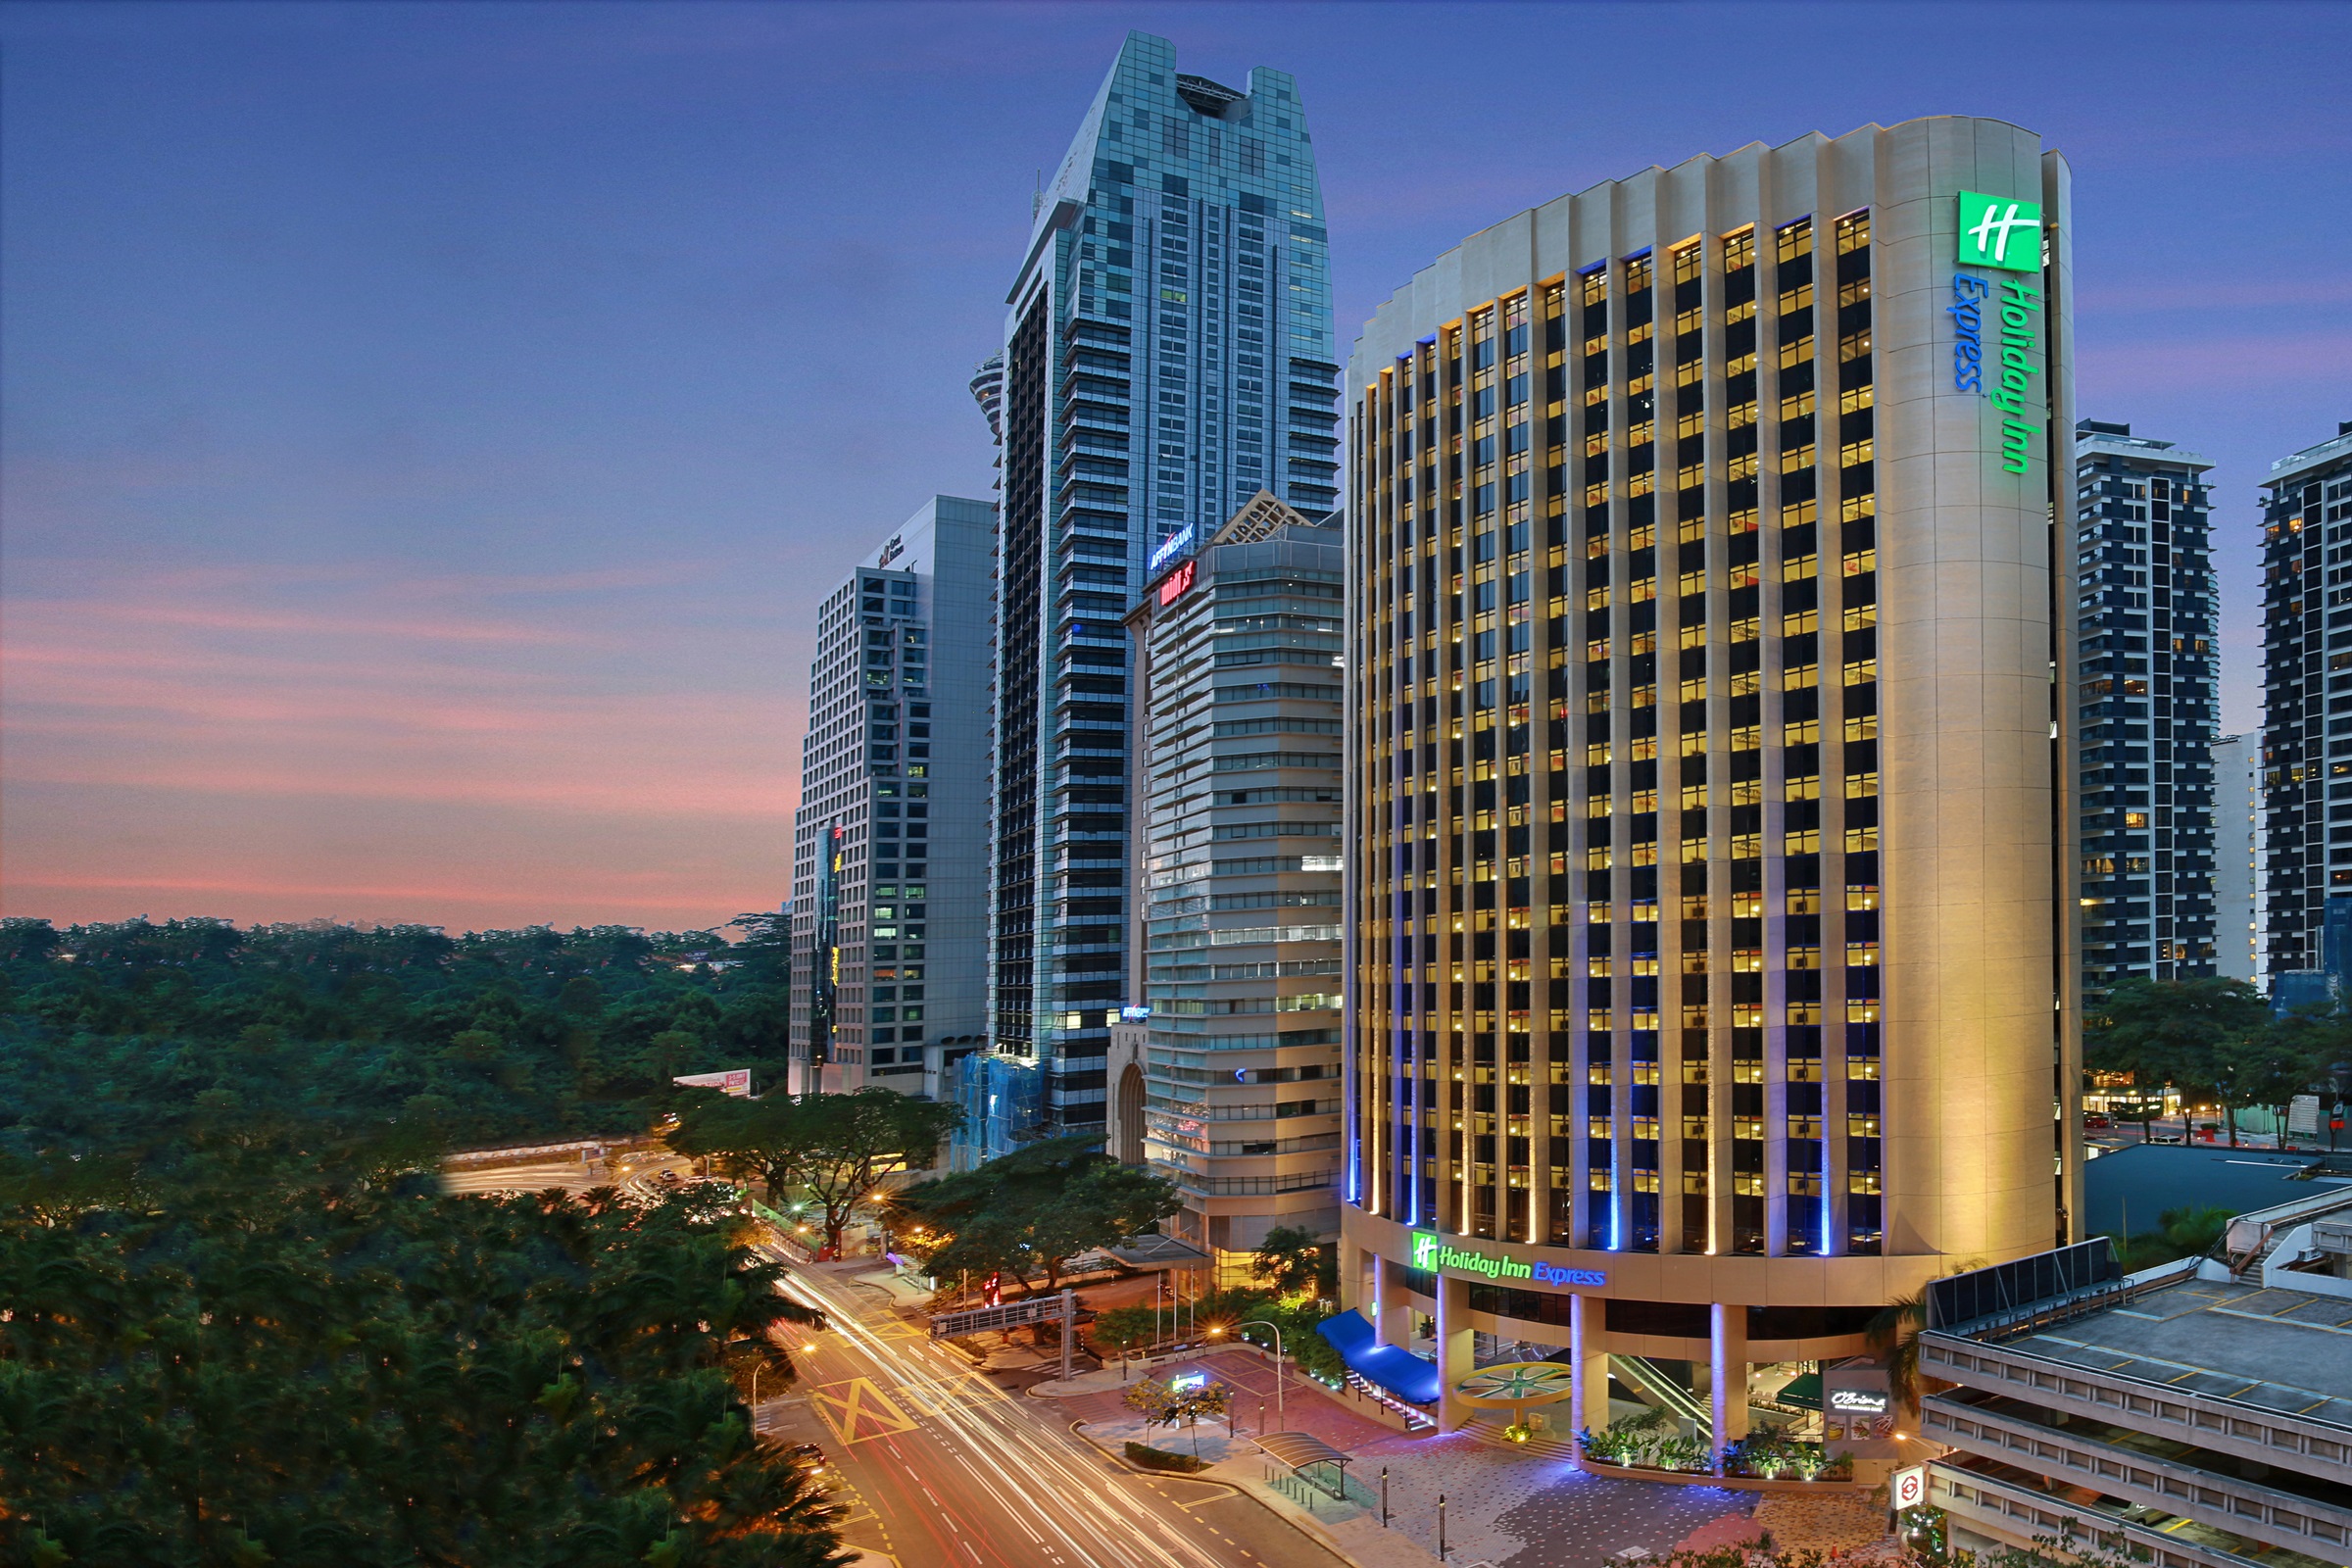 Holiday Inn Express marks entry into Malaysia with the opening of Holiday Inn Express Kuala Lumpur City Centre